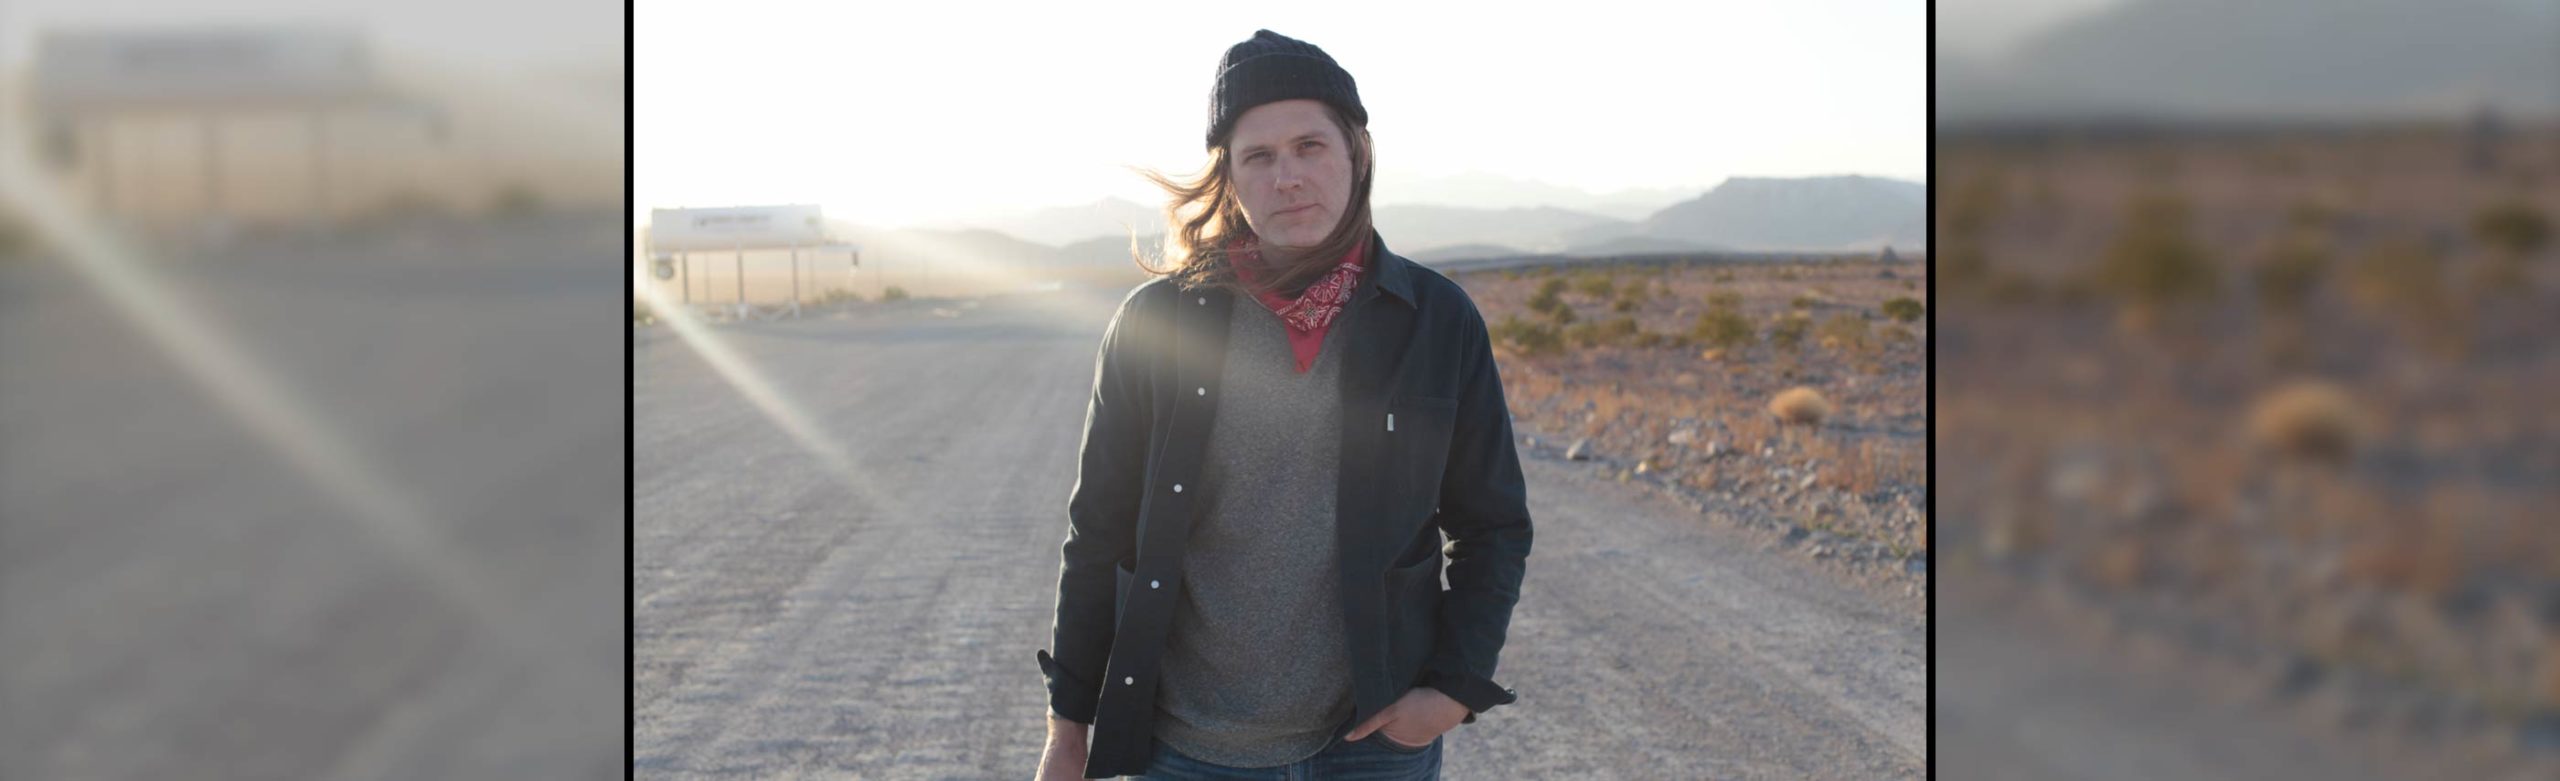 Indie Folk Band Fruit Bats Announce Concerts in Missoula and Bozeman Image